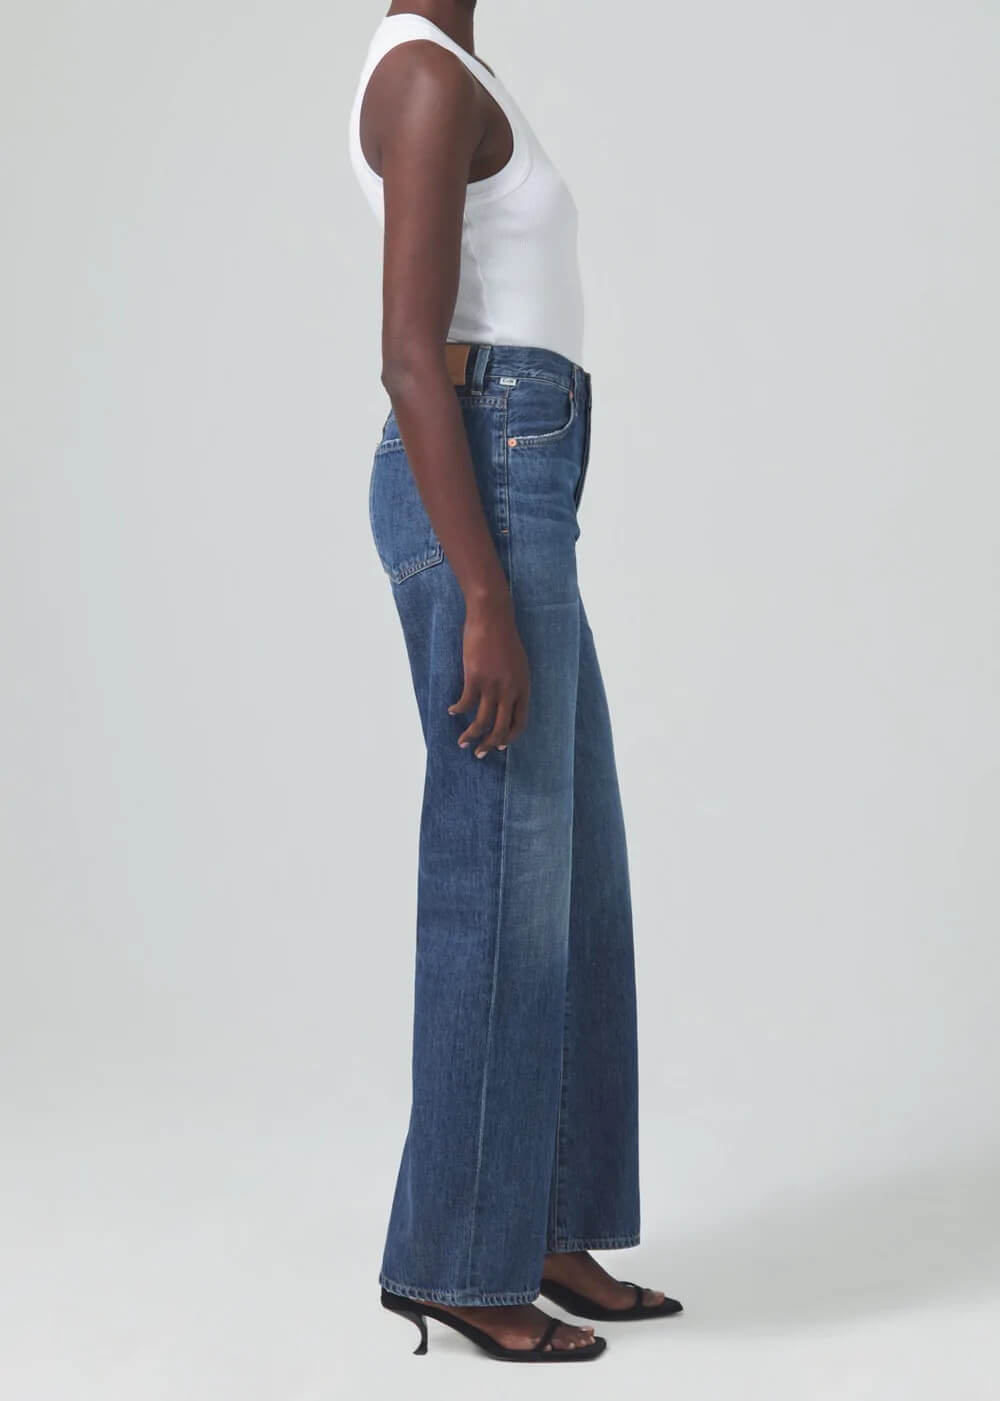 Citizens Of Humanity Annina Trouser Jean in Blue Rose from The New Trend